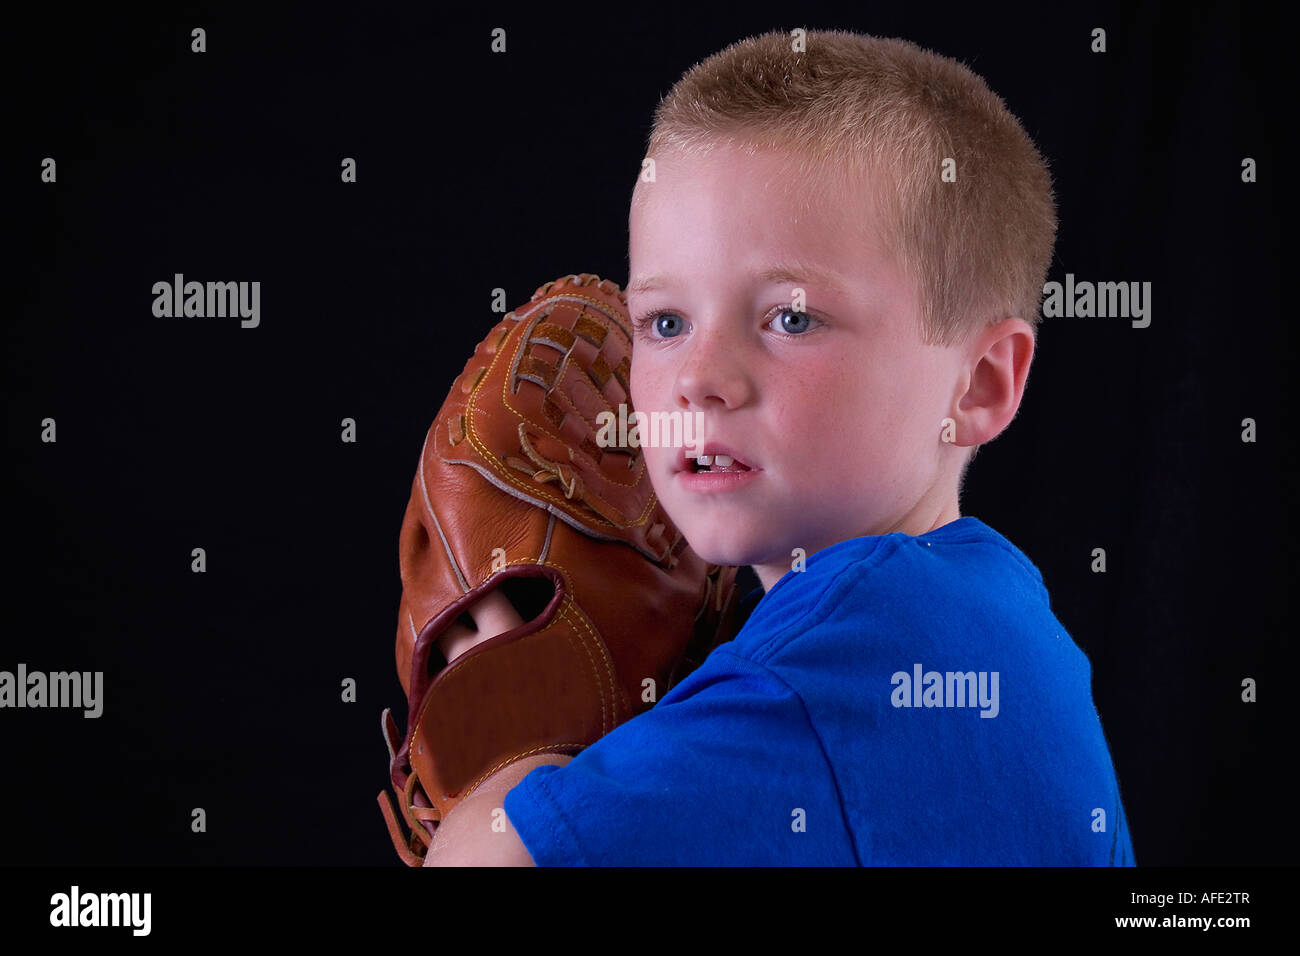 Little blond little league player ready to pitch the ball Stock Photo